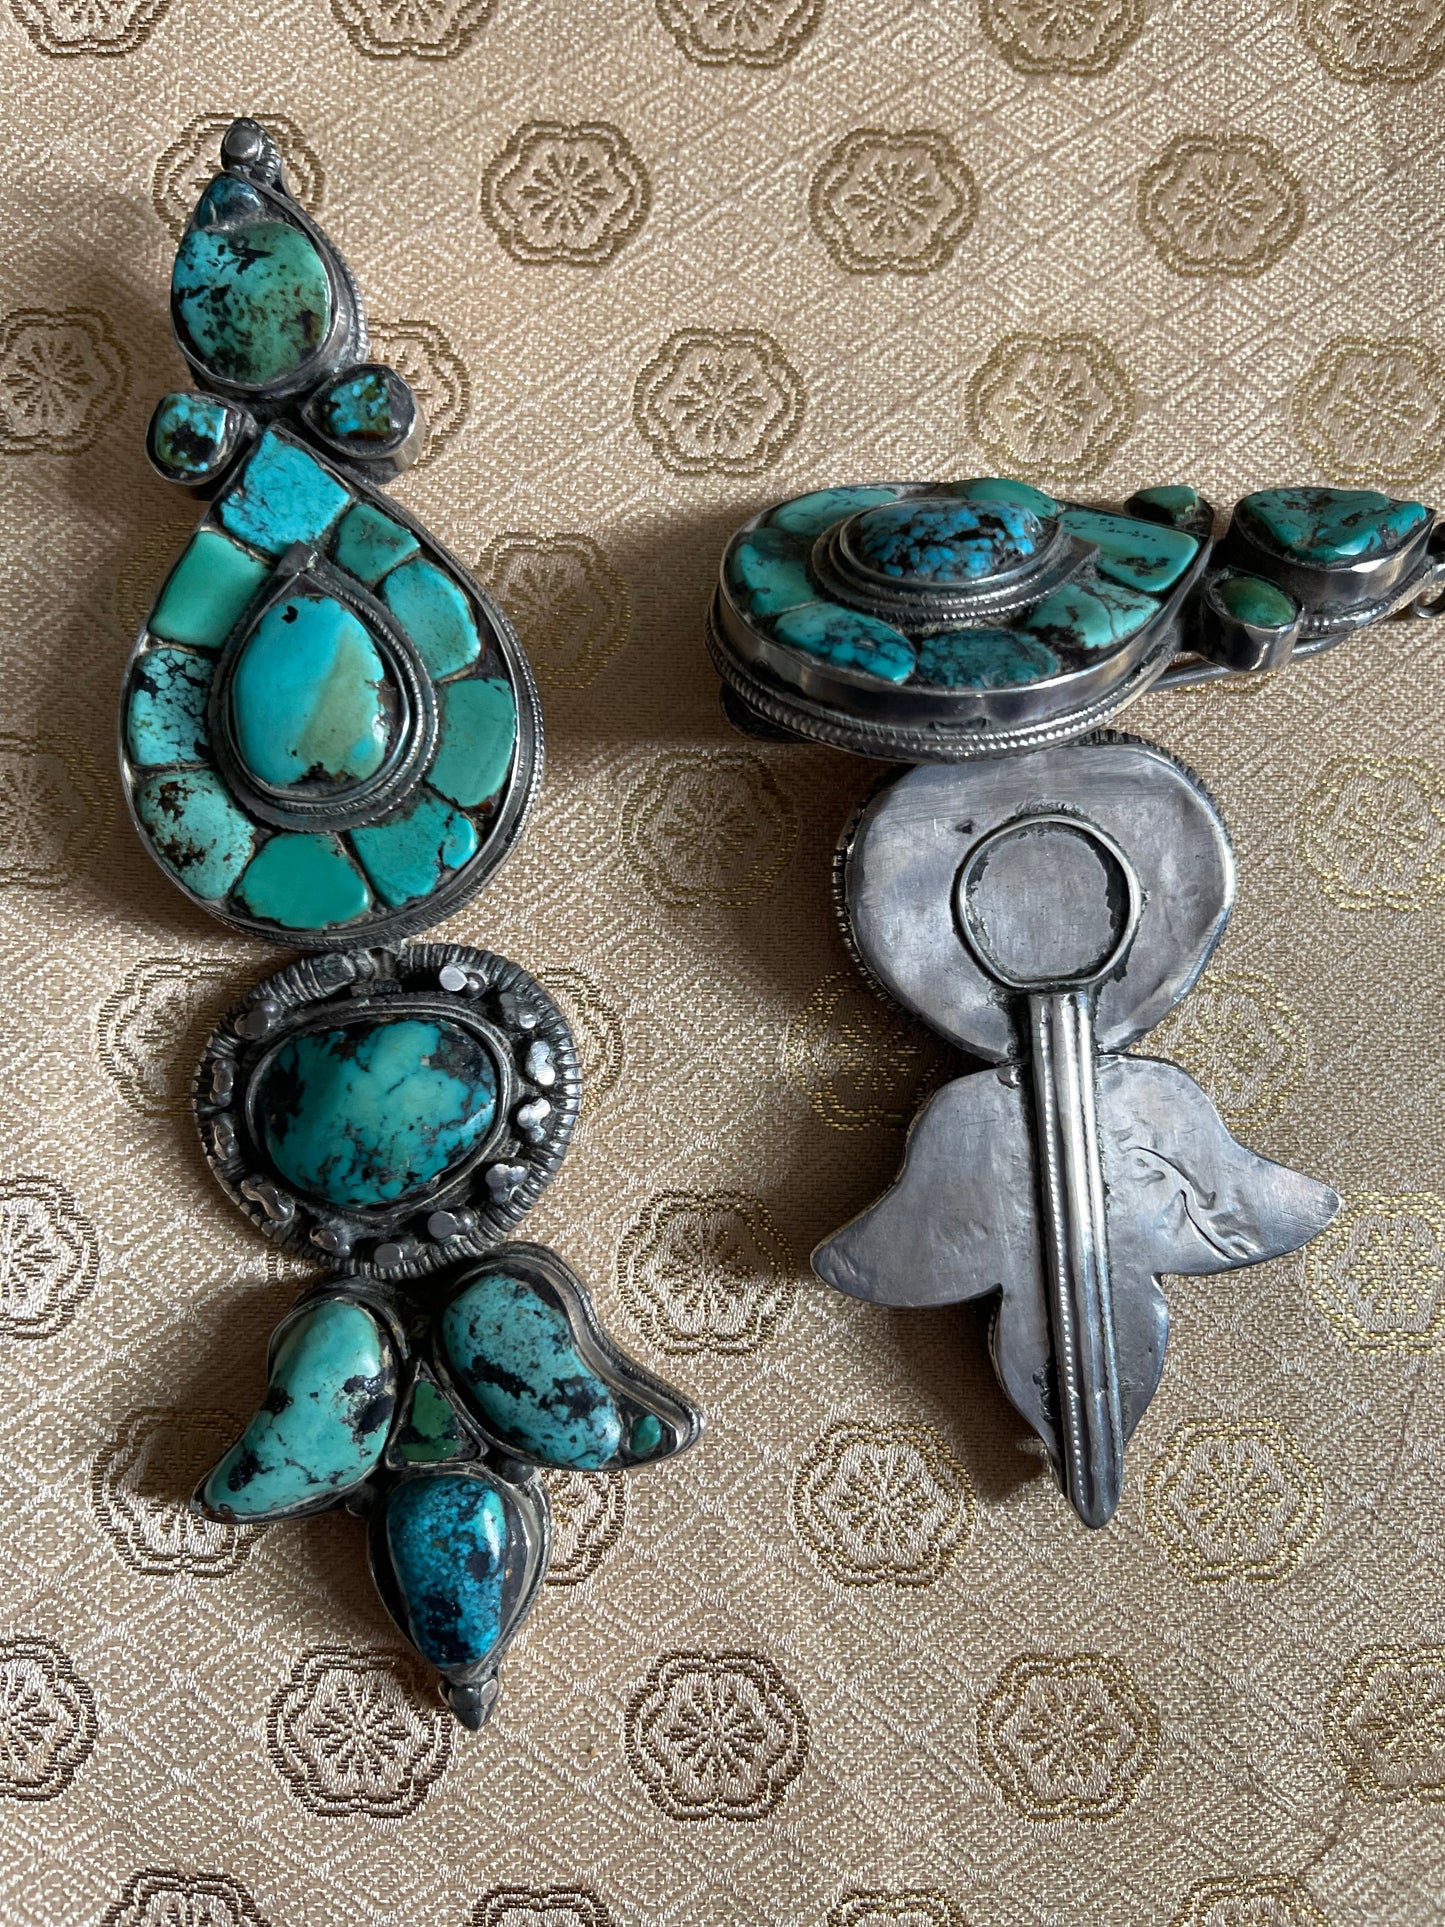 Pair of antique turquoise and silver Tibetan ear pendant / earring